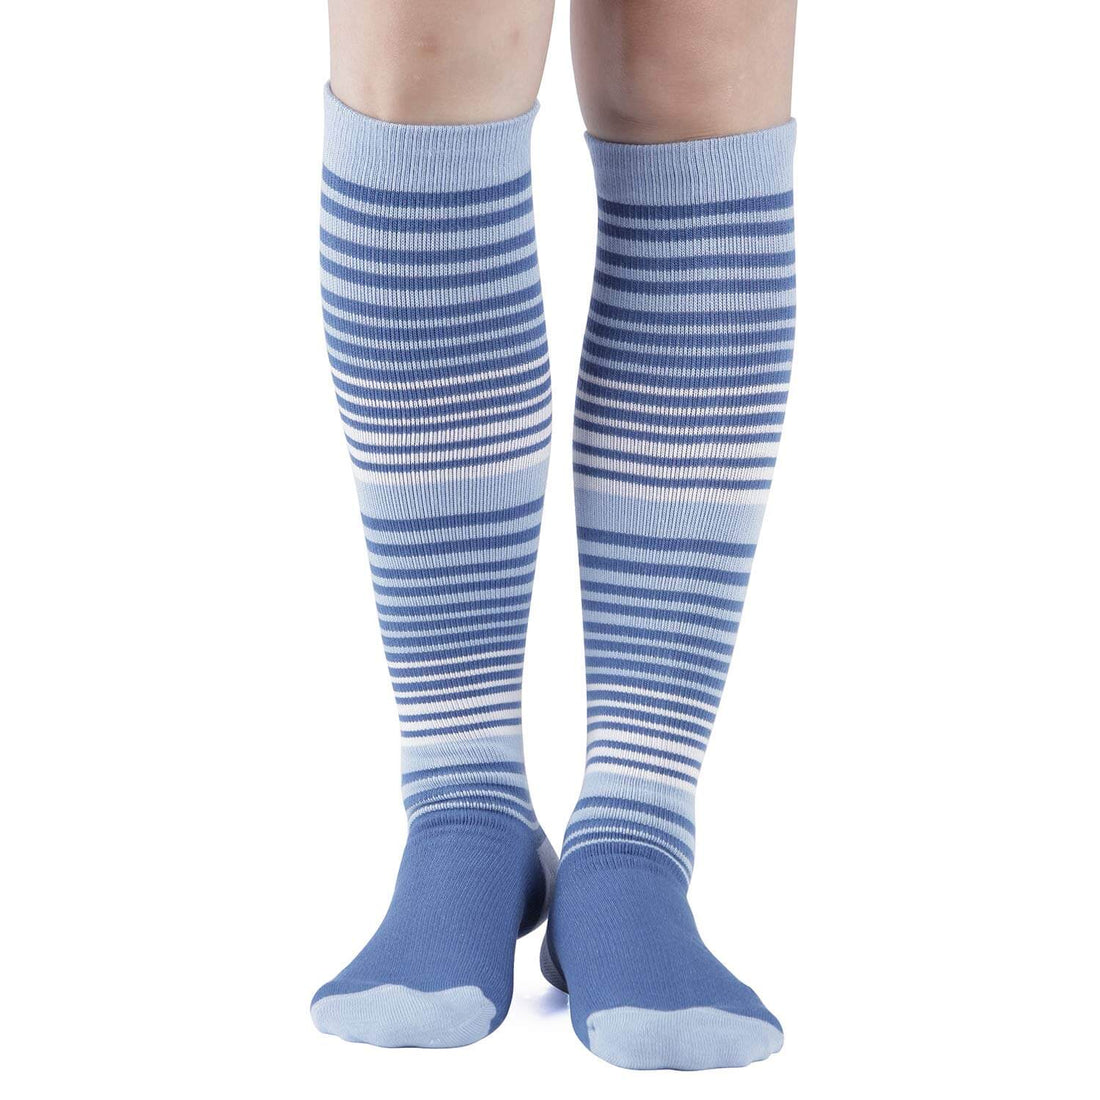 What are diabetes compression socks?